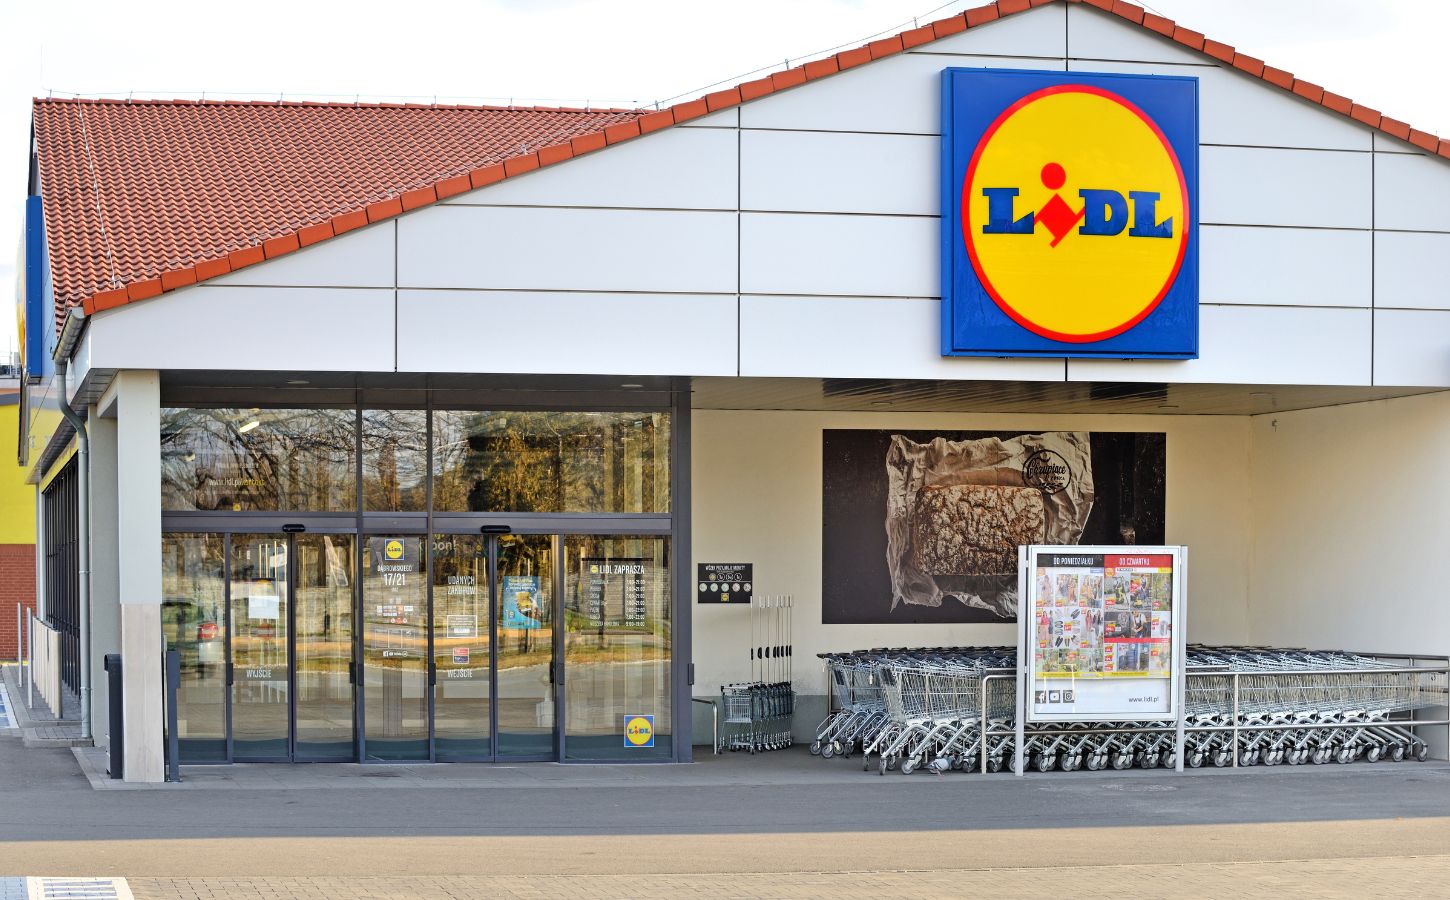 Lidl Makes Vegan Food The Same Price As Meat Equivalents